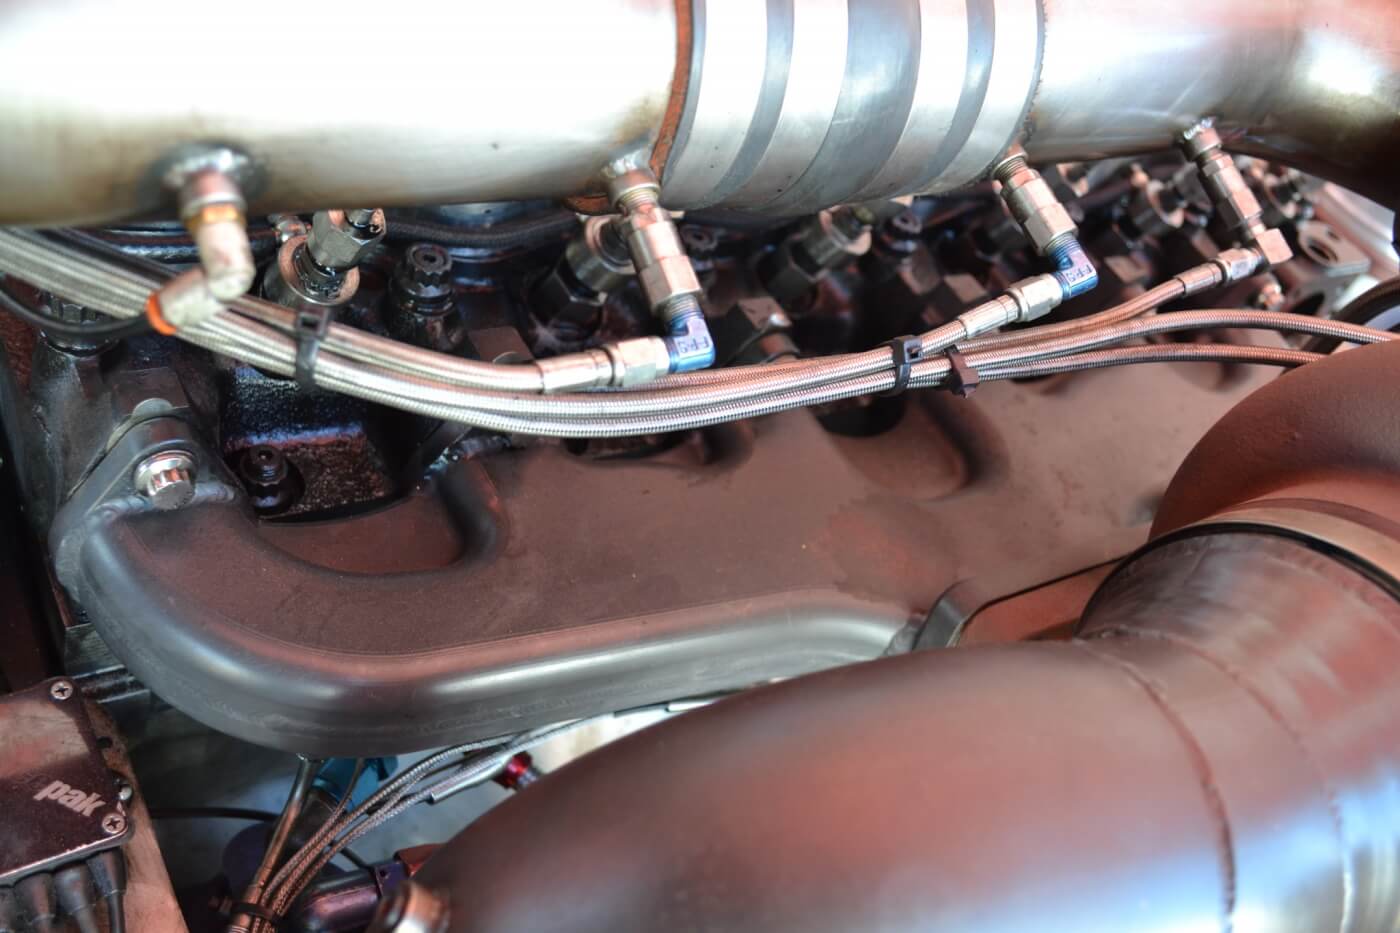 A Steed Speed exhaust manifold with a T6 flange is both larger, better flowing, and tougher than a factory Cummins exhaust manifold. For John's engine, it was the perfect choice.